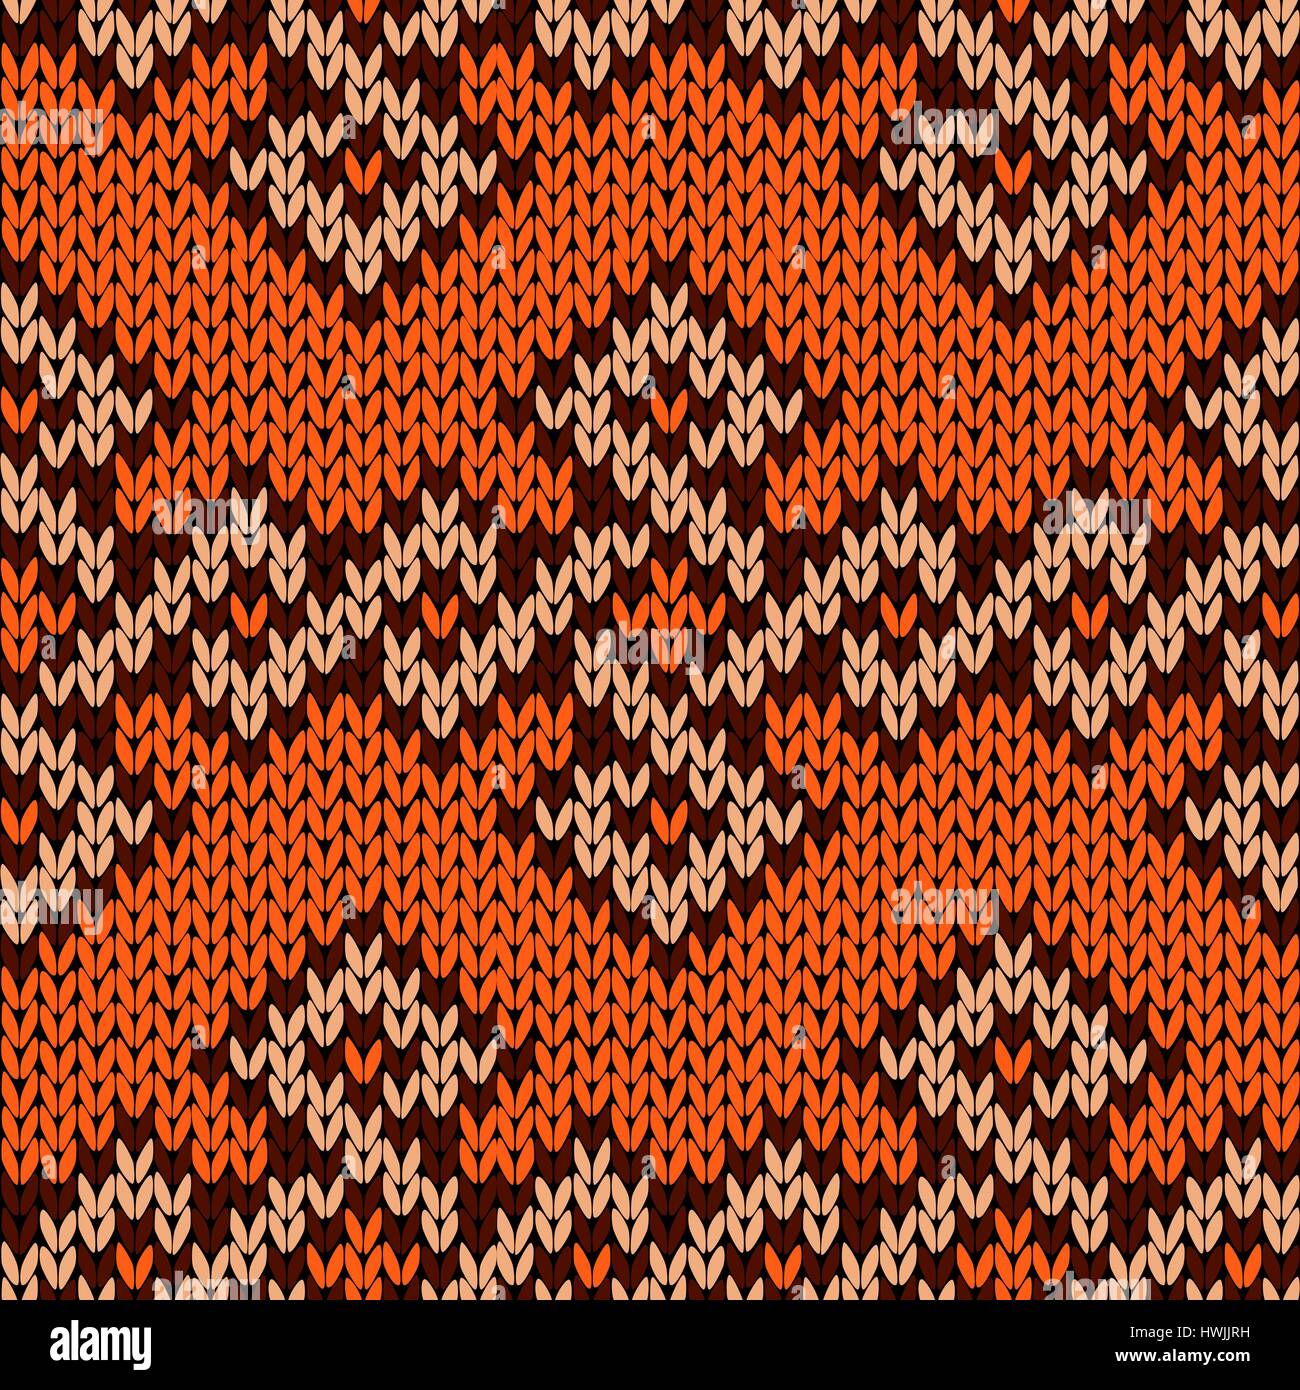 Ethnic Ornate Knitting Seamless Vector Pattern In Orange Brown And Beige Colours As A Fabric Texture Stock Vector Image Art Alamy